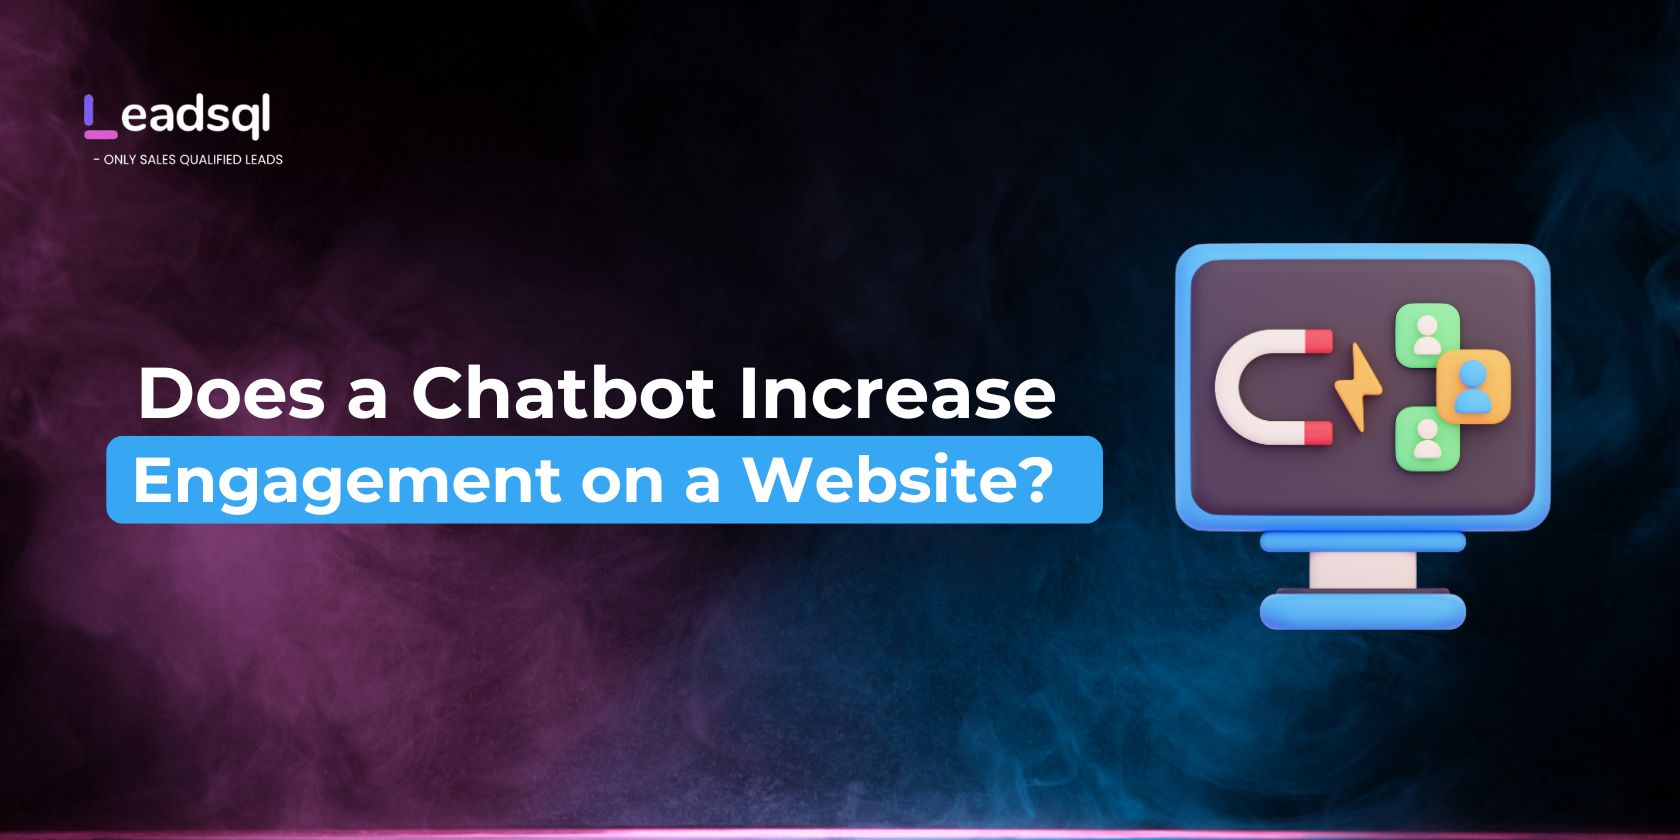 Does a Chatbot Increase Engagement on a Website?